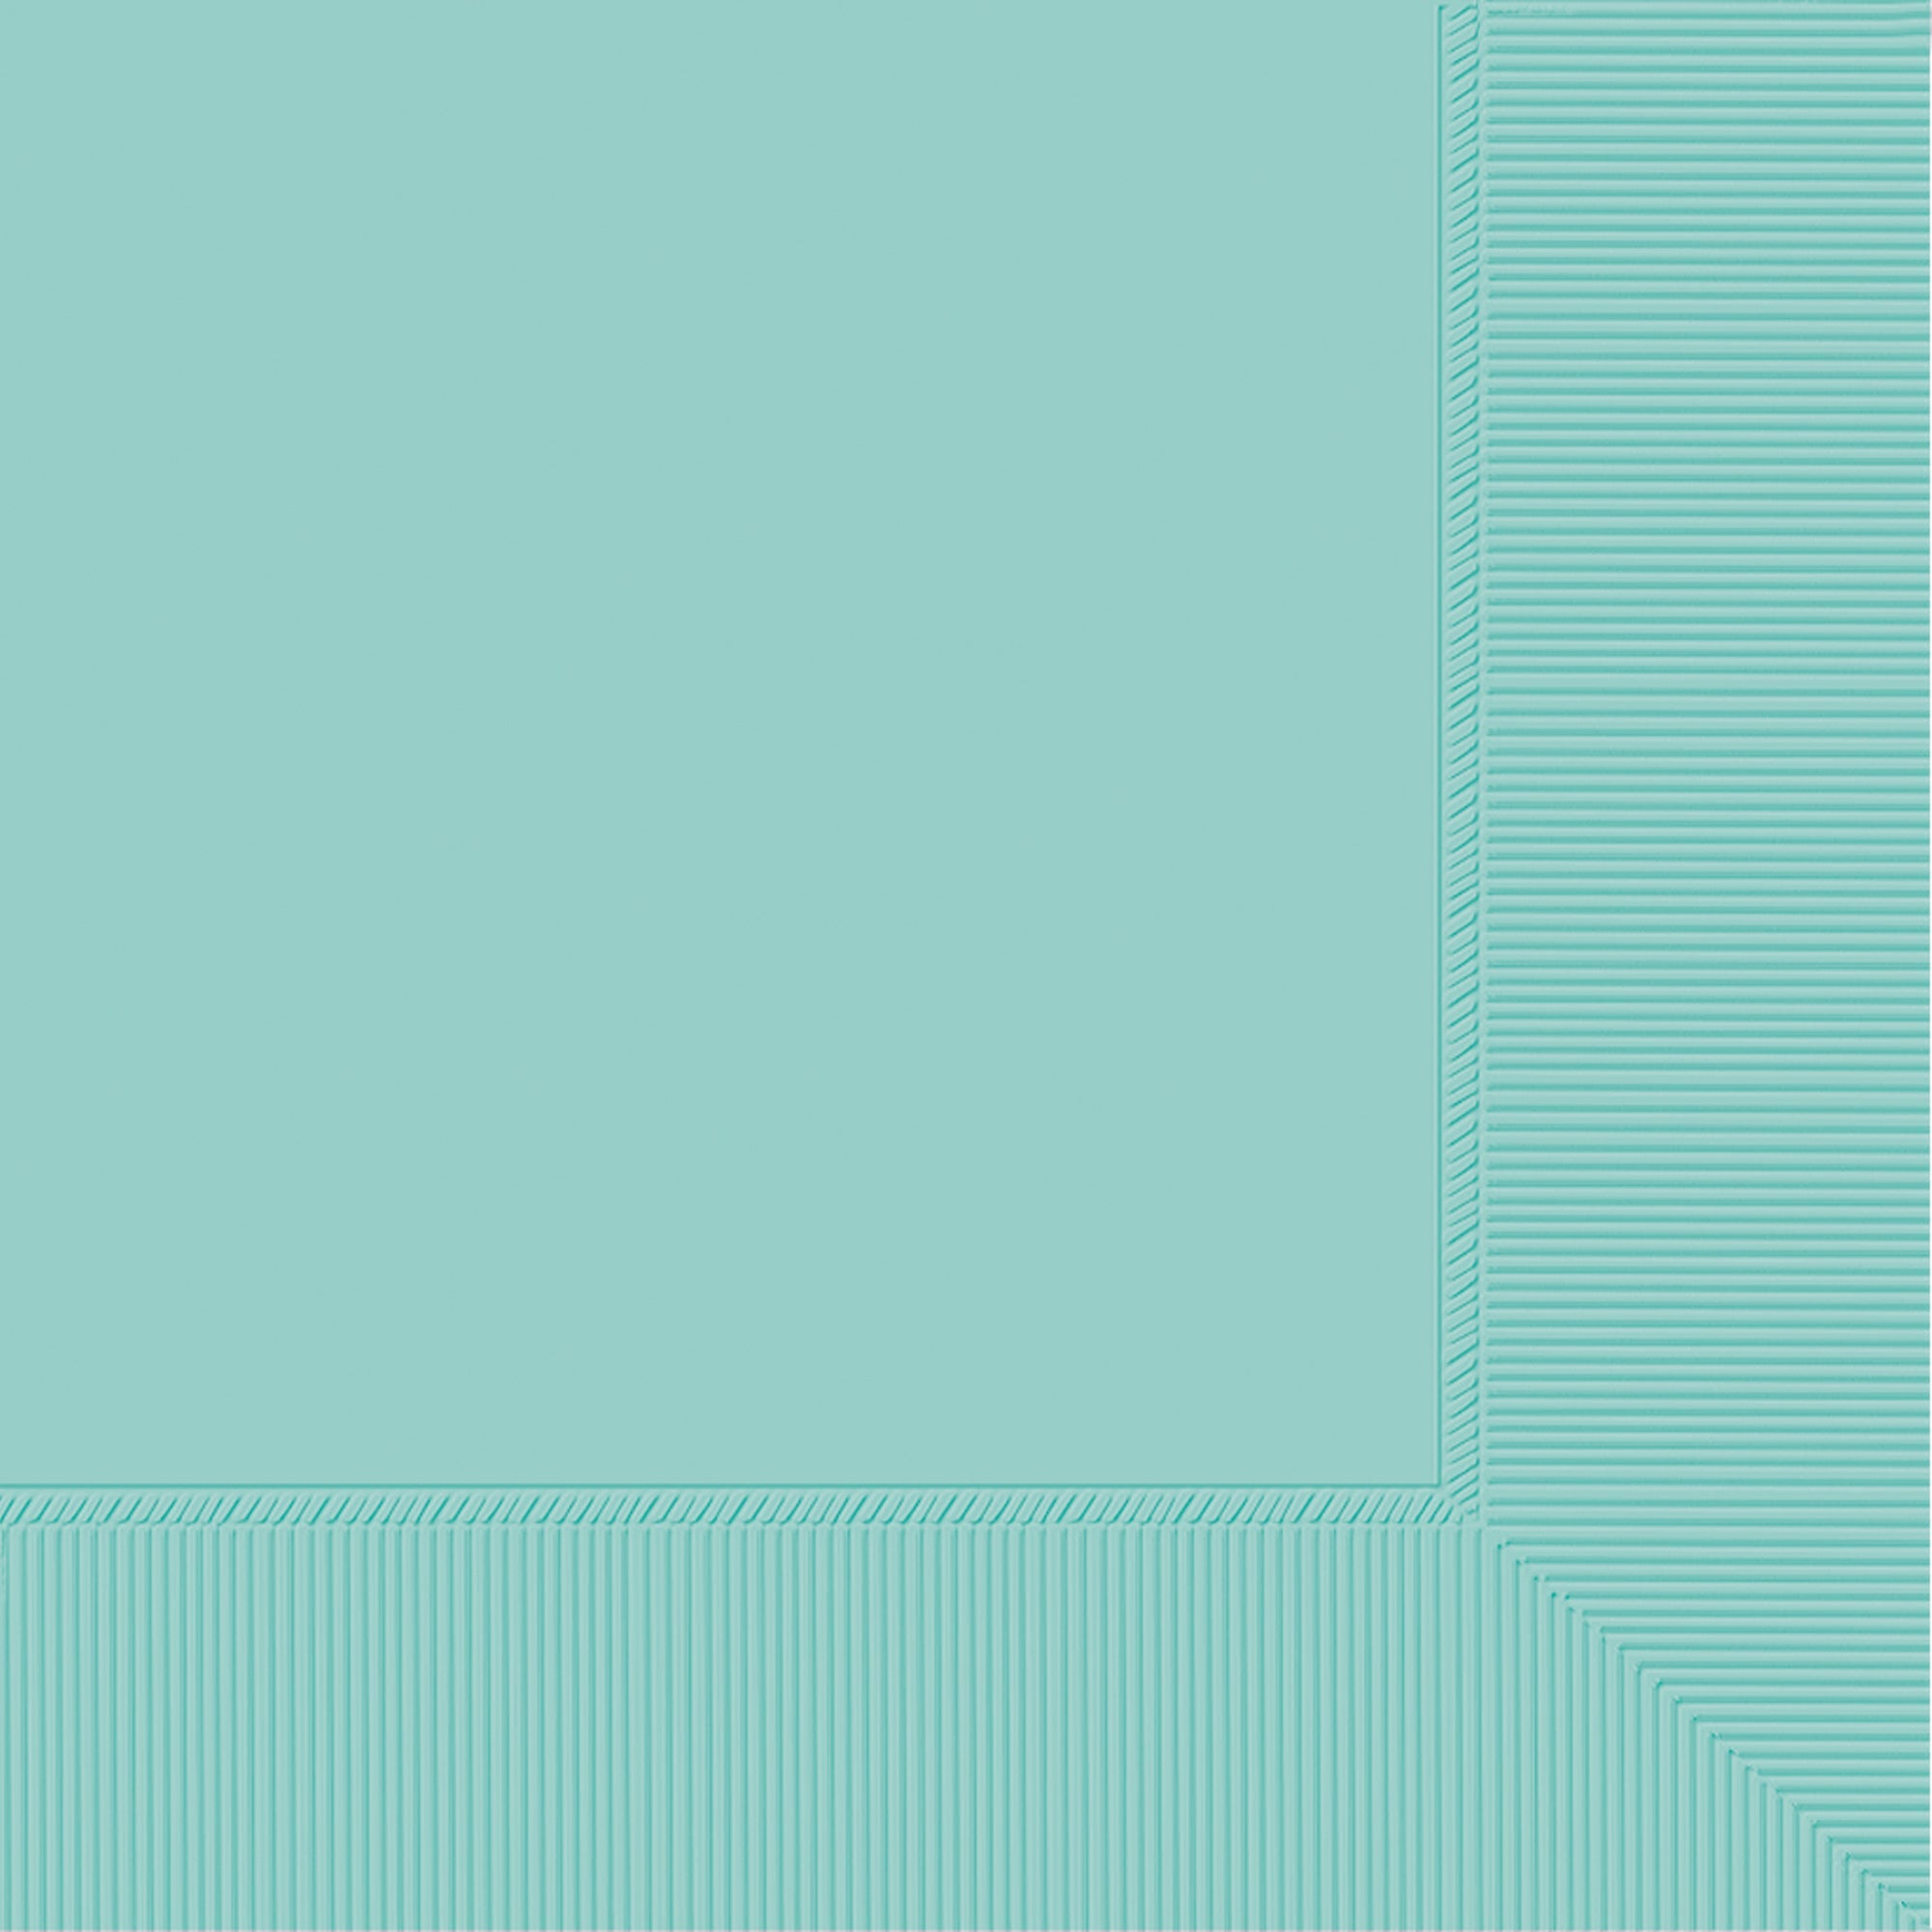 Luncheon Napkins  Robin Egg Blue  40 pcs  13x13in  2 Ply